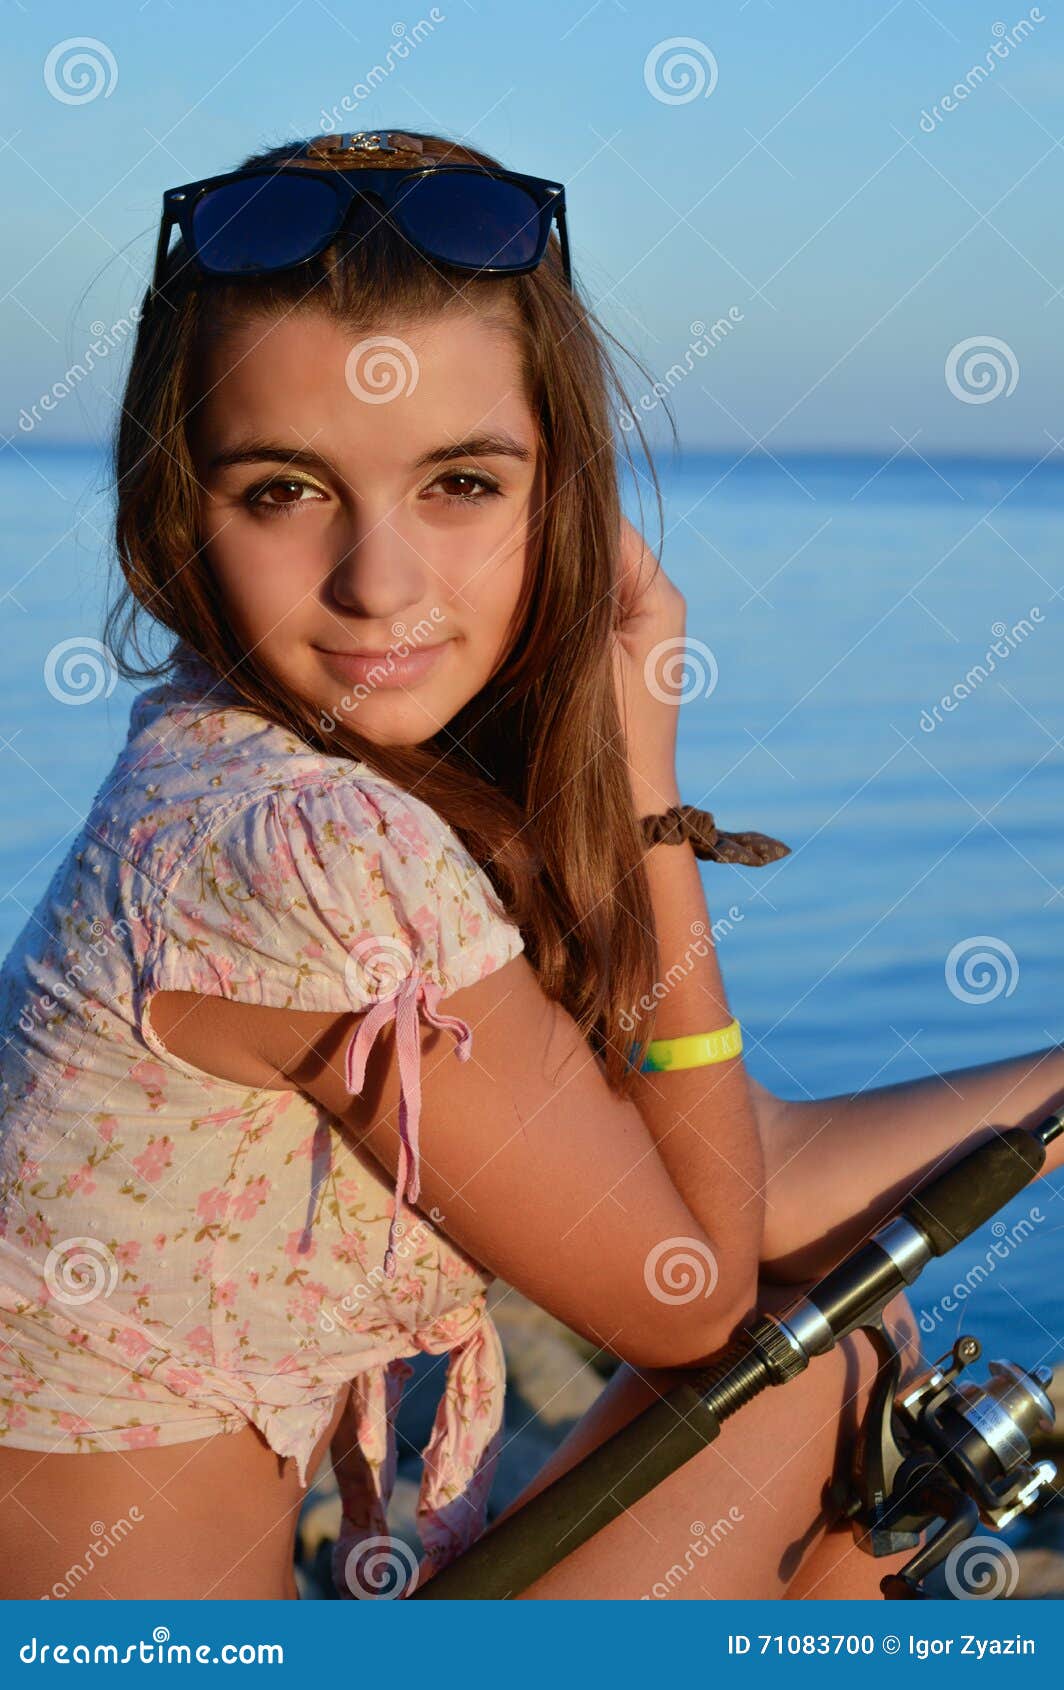 Woman fishing at sea stock photo. Image of catch, gold - 71083700